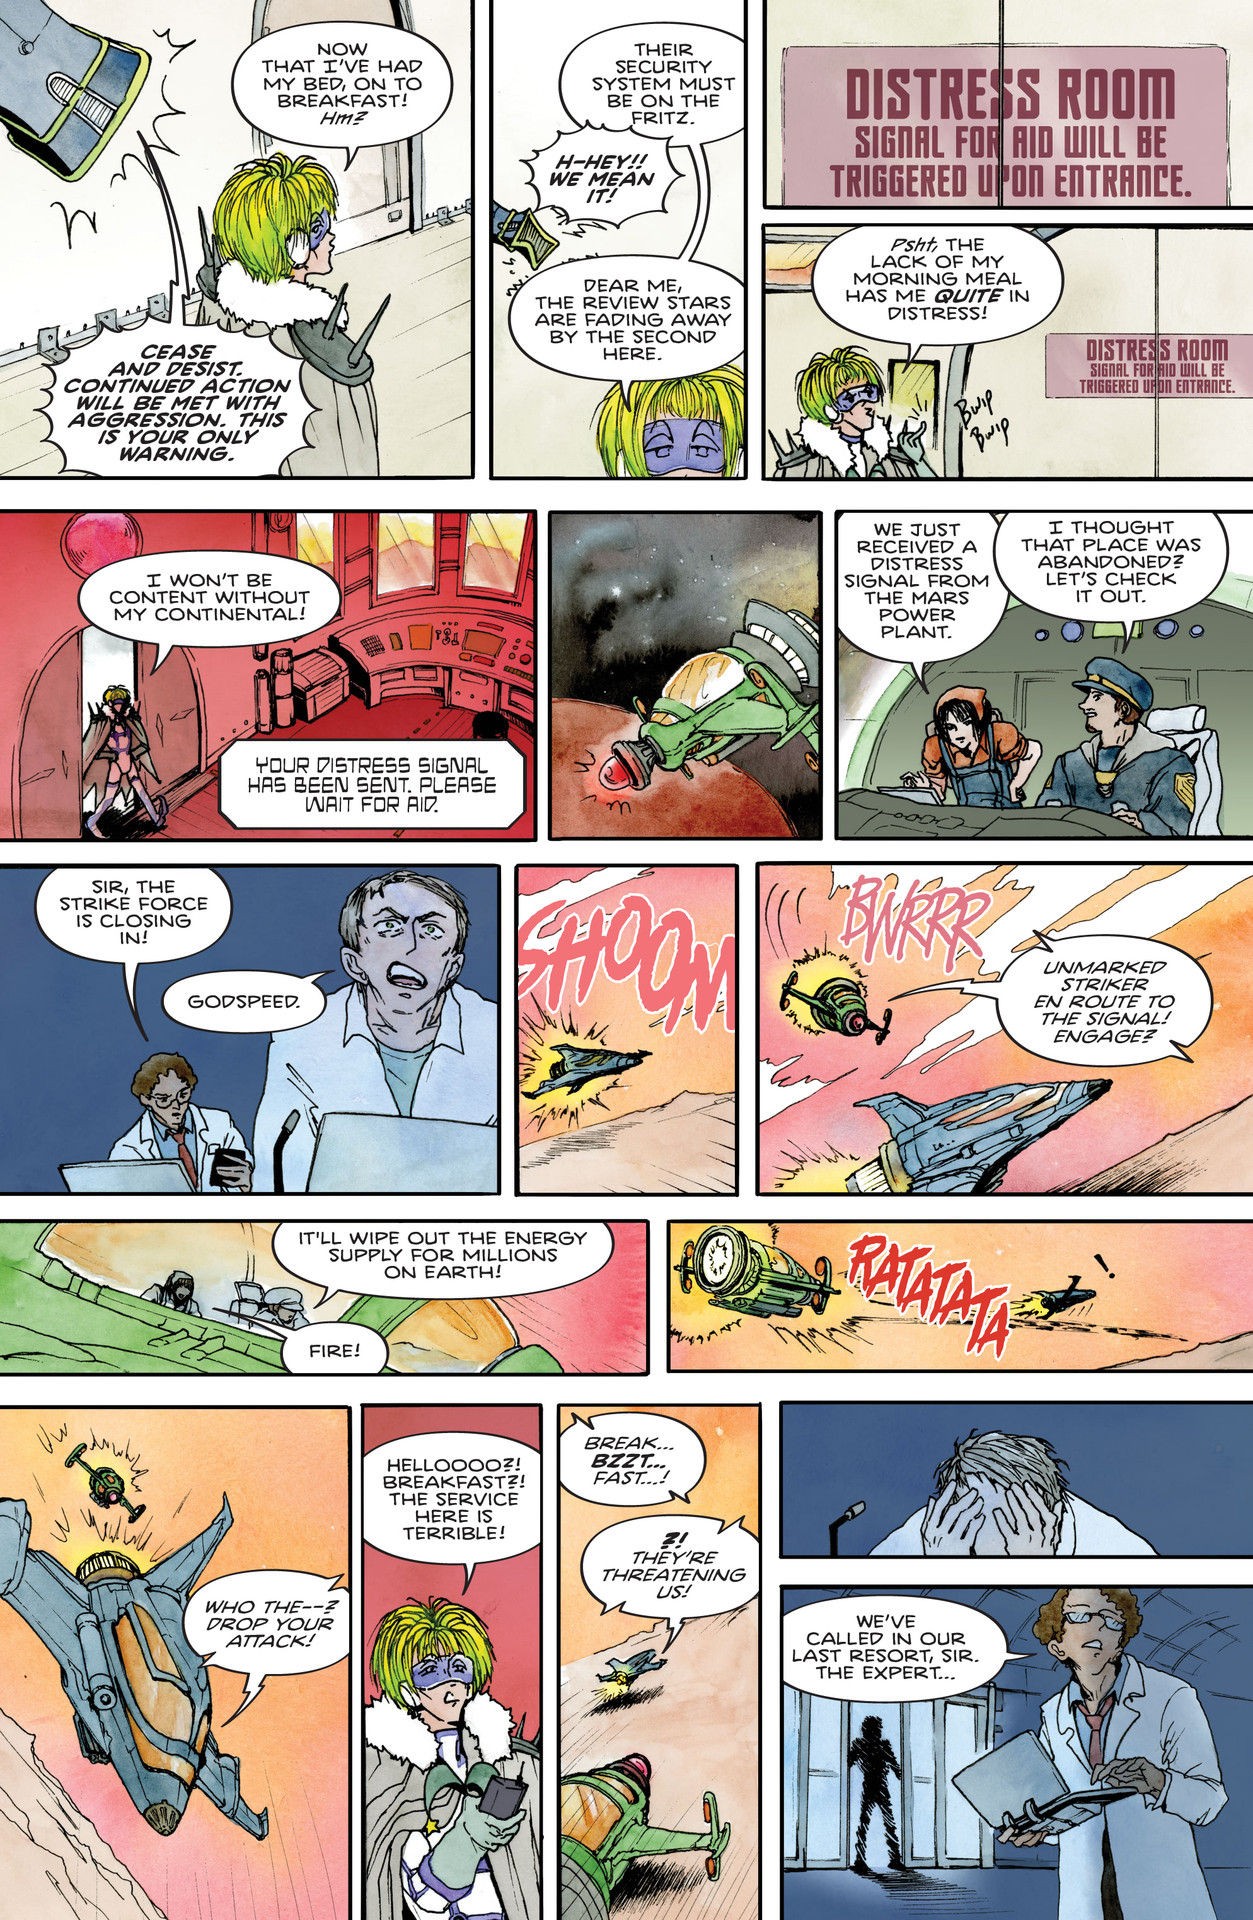 Read online Xino comic -  Issue #2 - 23